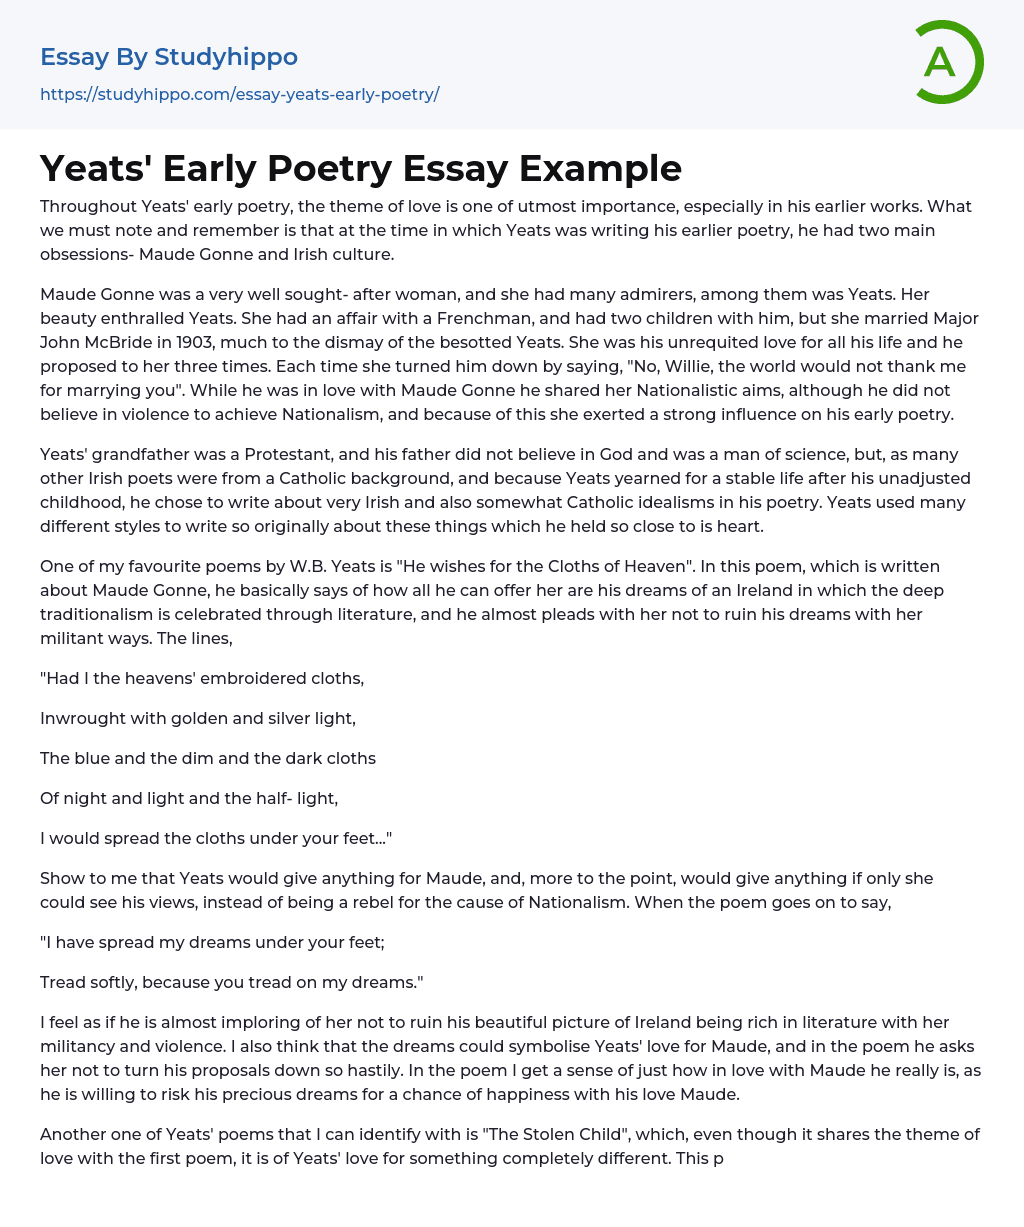 Yeats’ Early Poetry Essay Example